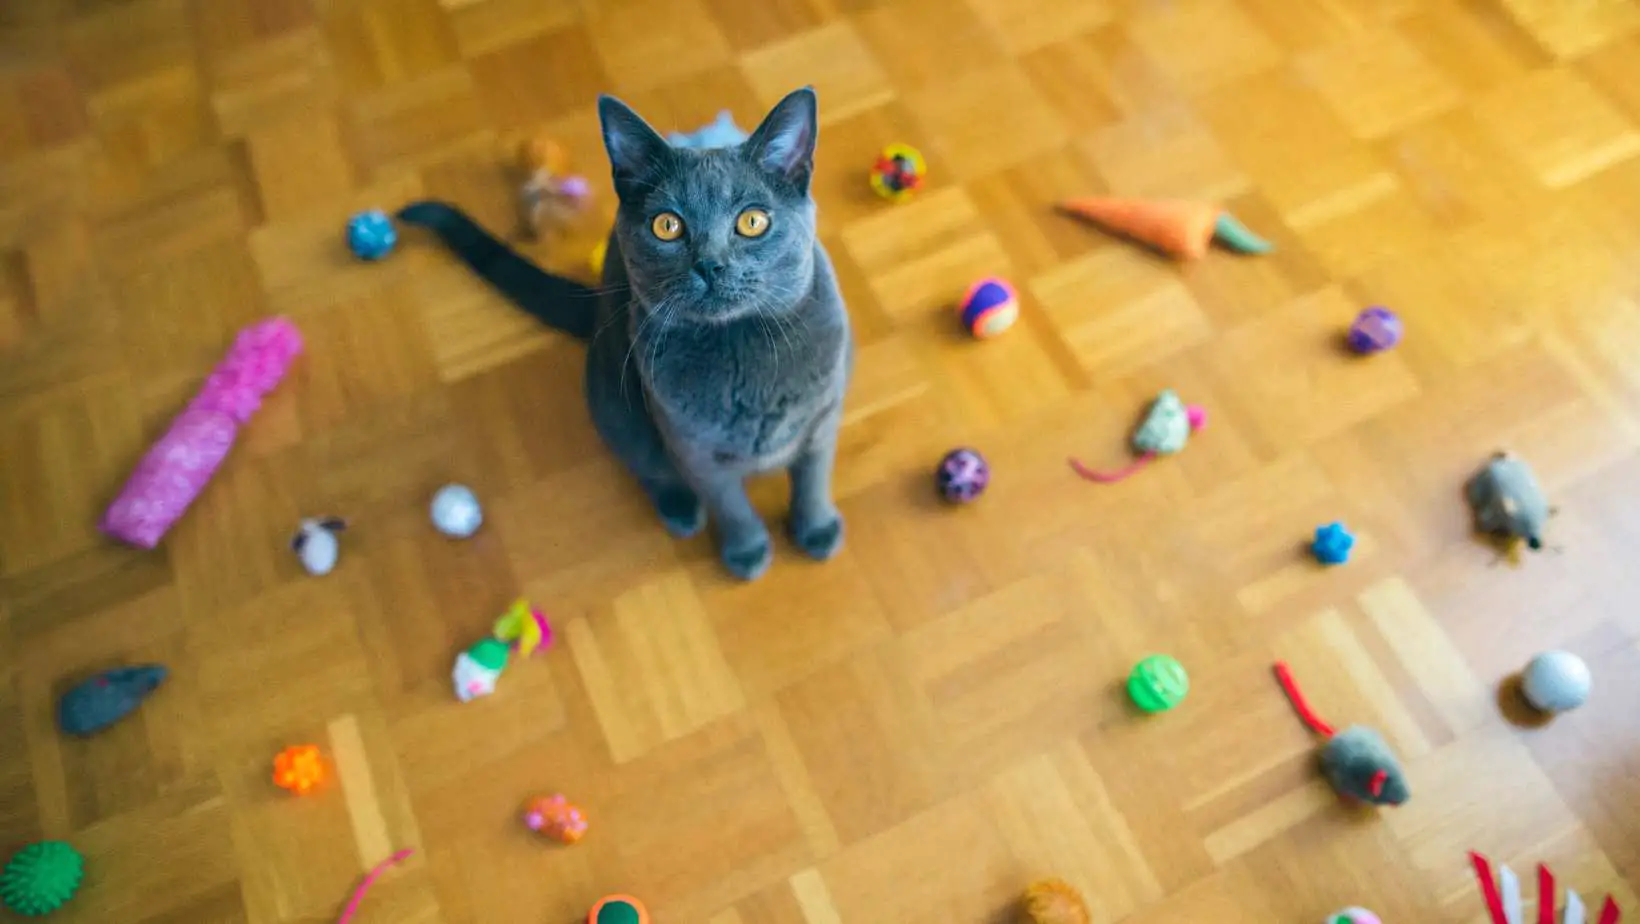 How to Make a Toy for Your Cat?